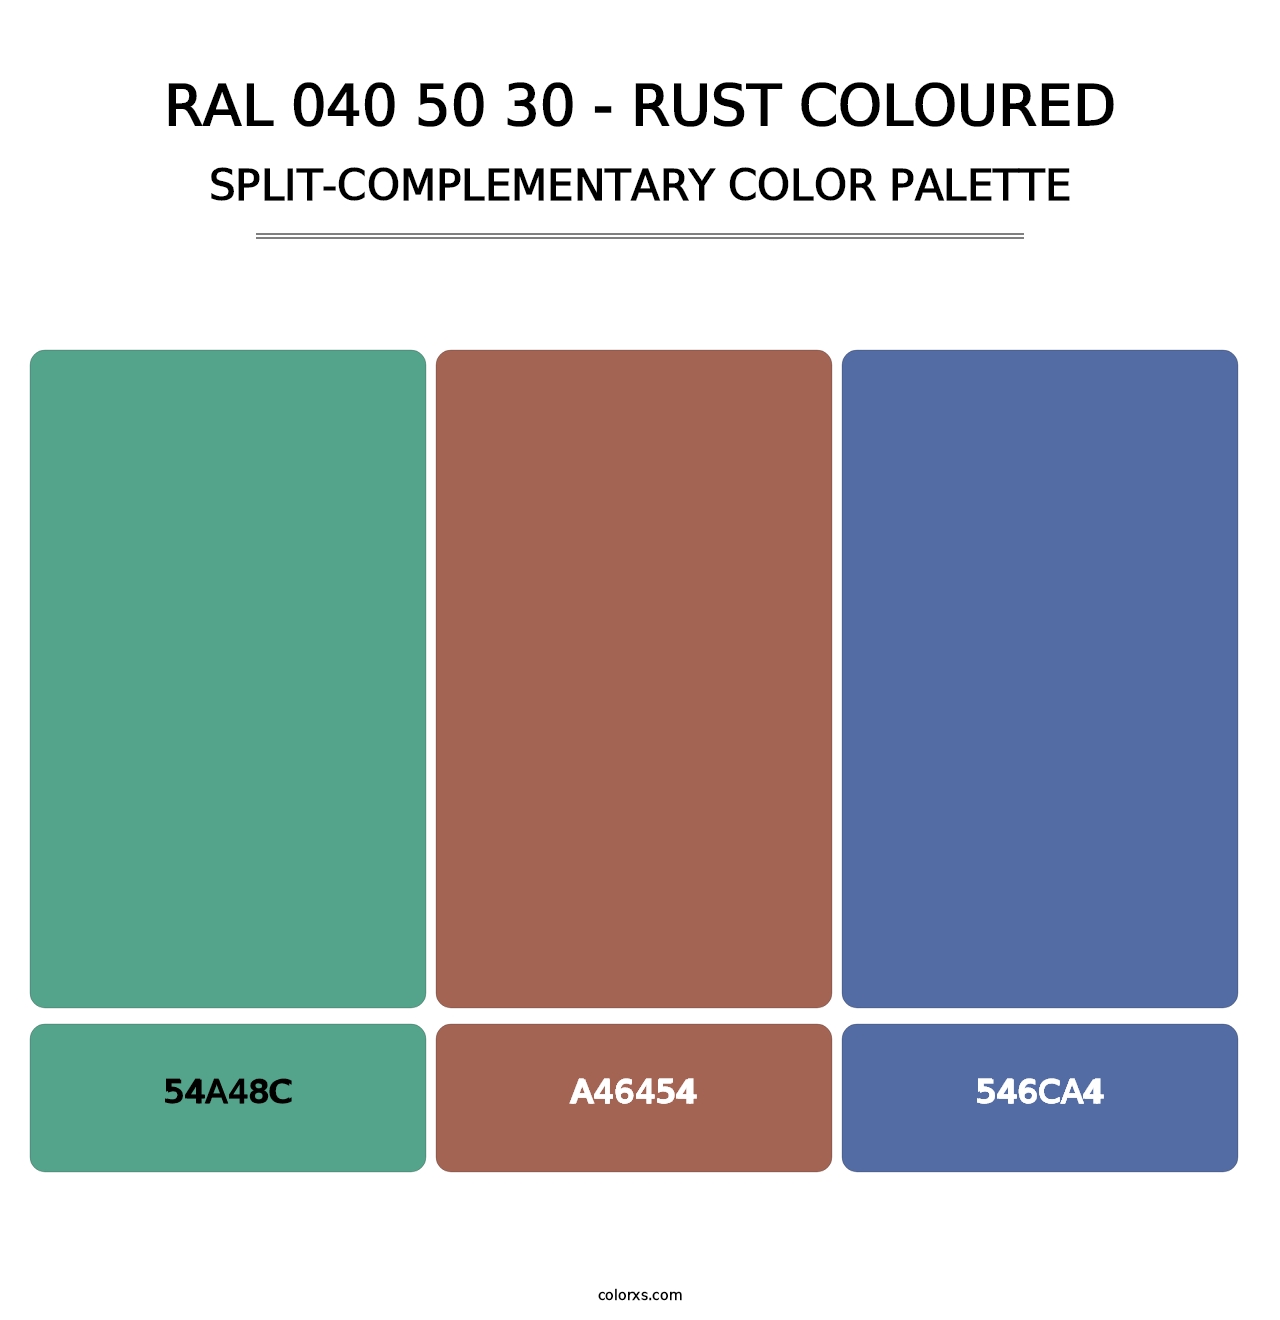 RAL 040 50 30 - Rust Coloured - Split-Complementary Color Palette